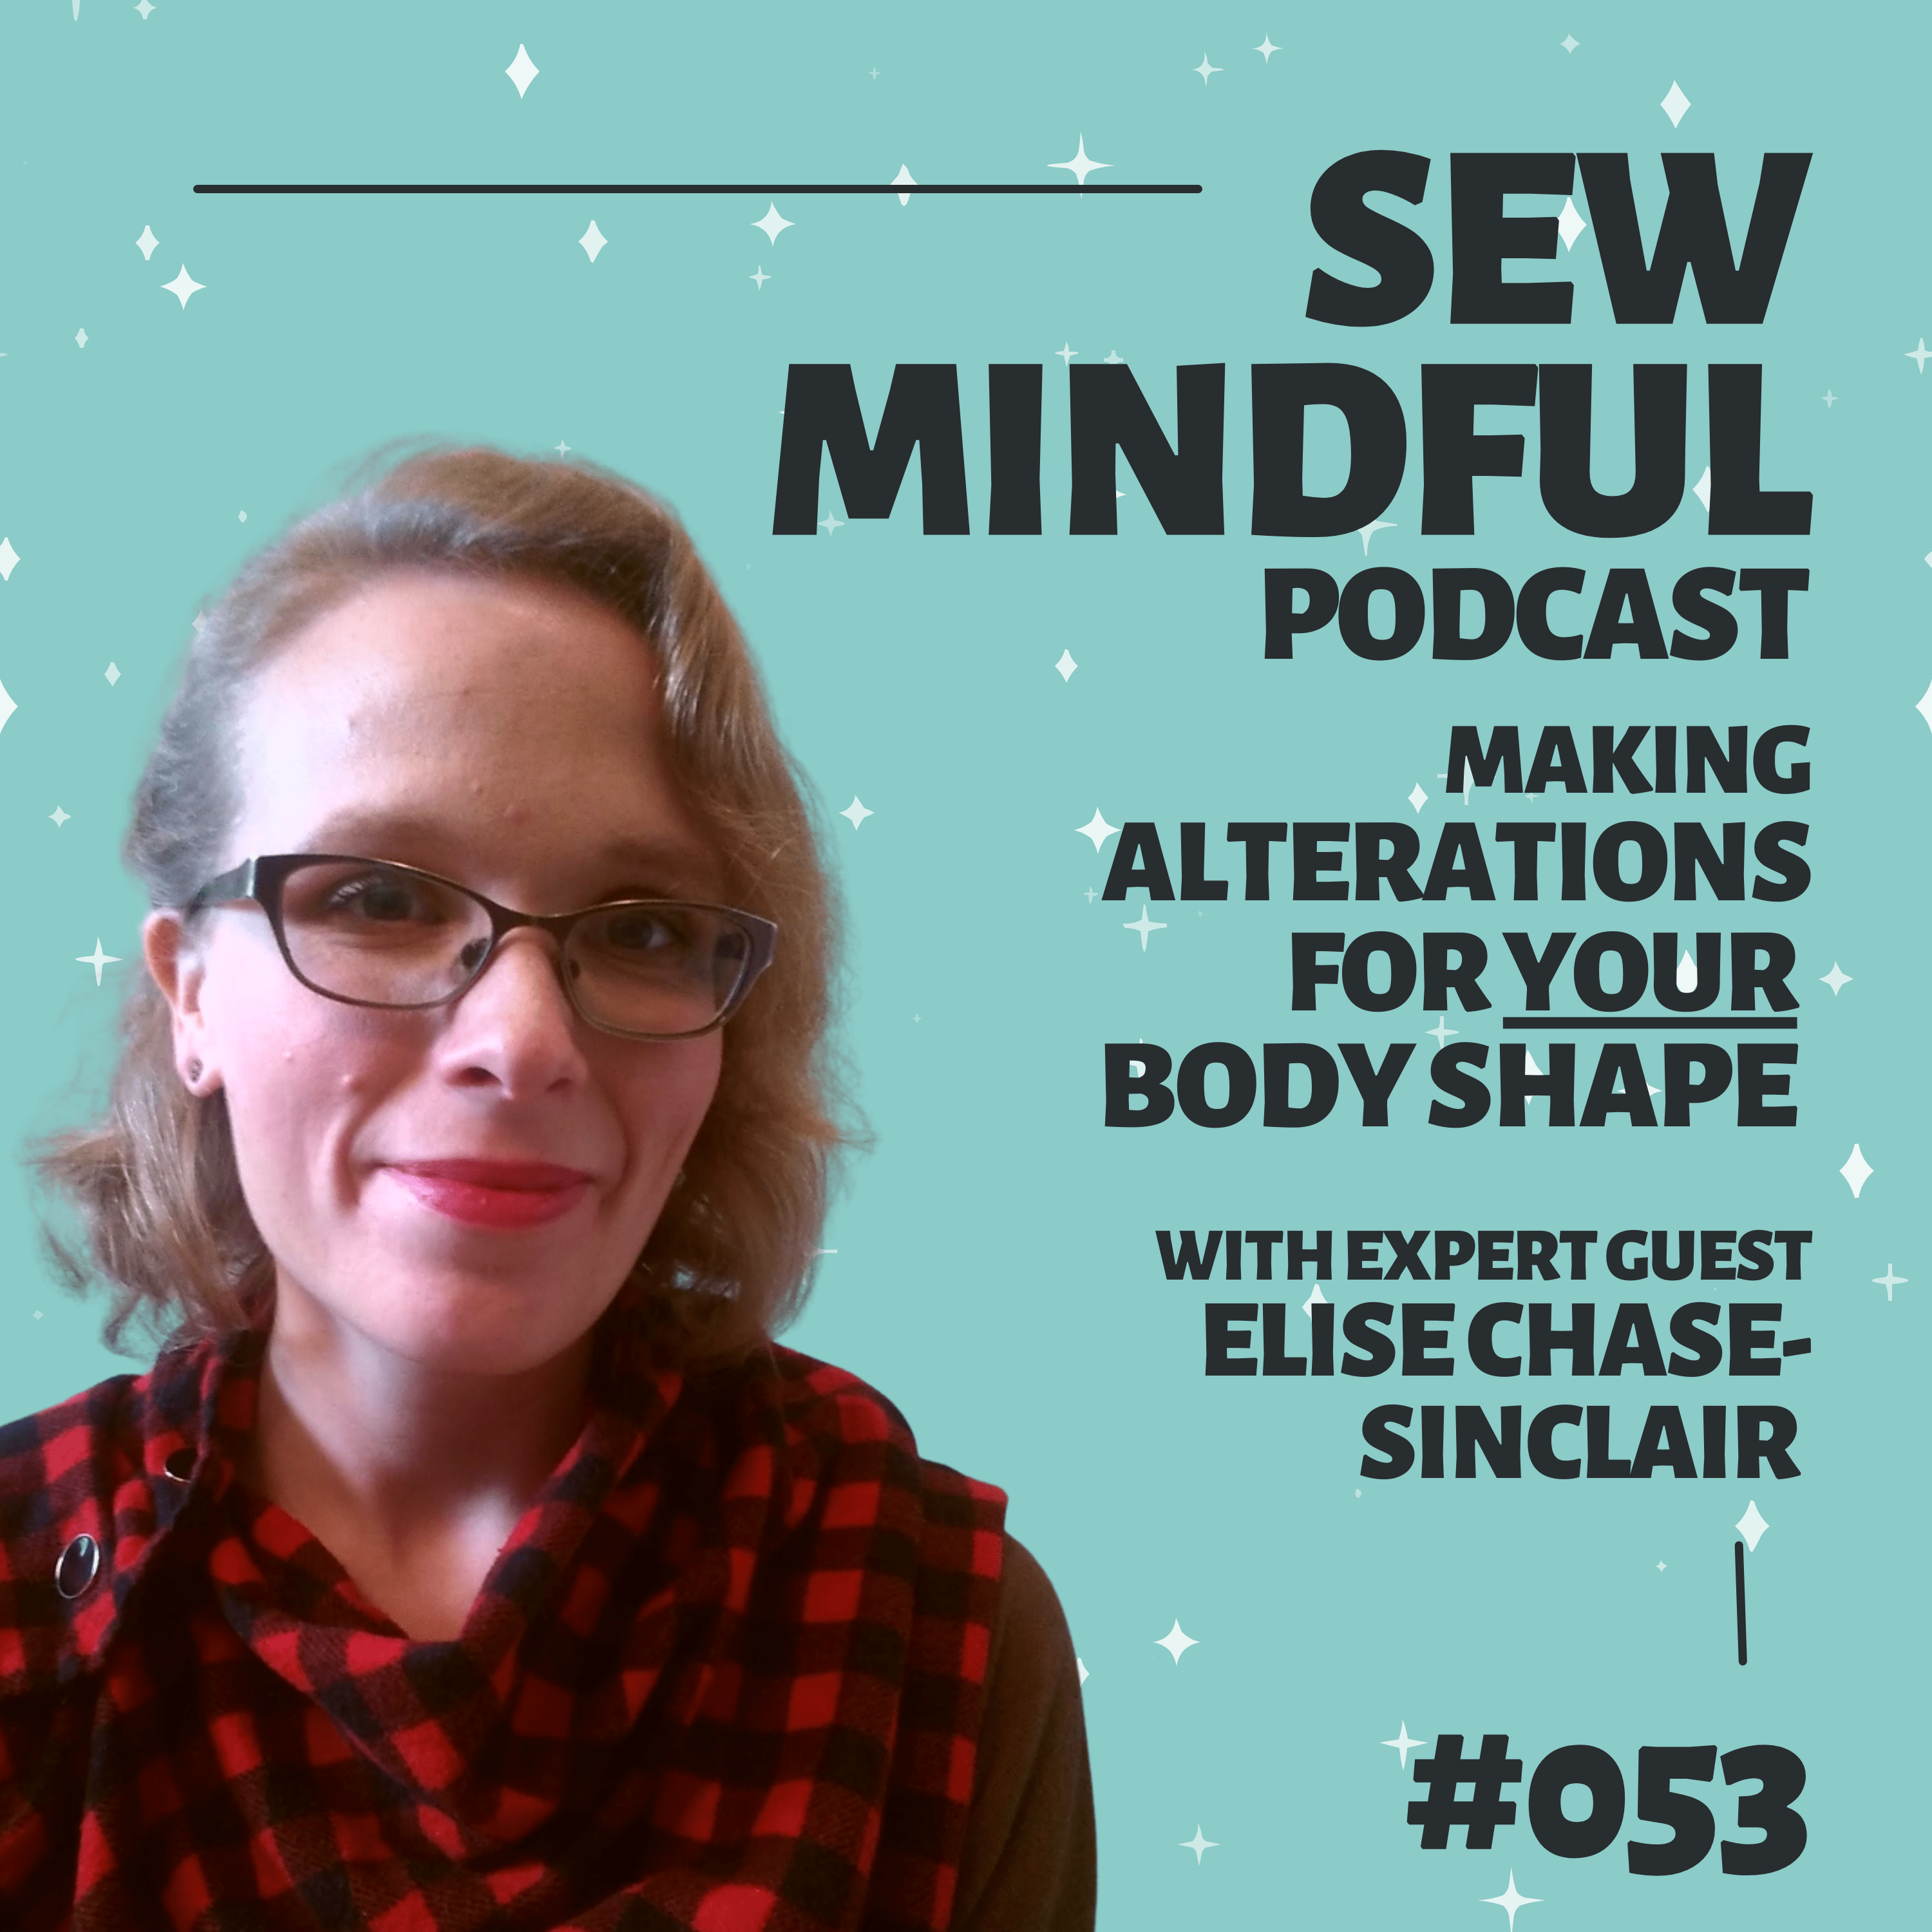 Sew Mindful Podcast Guest